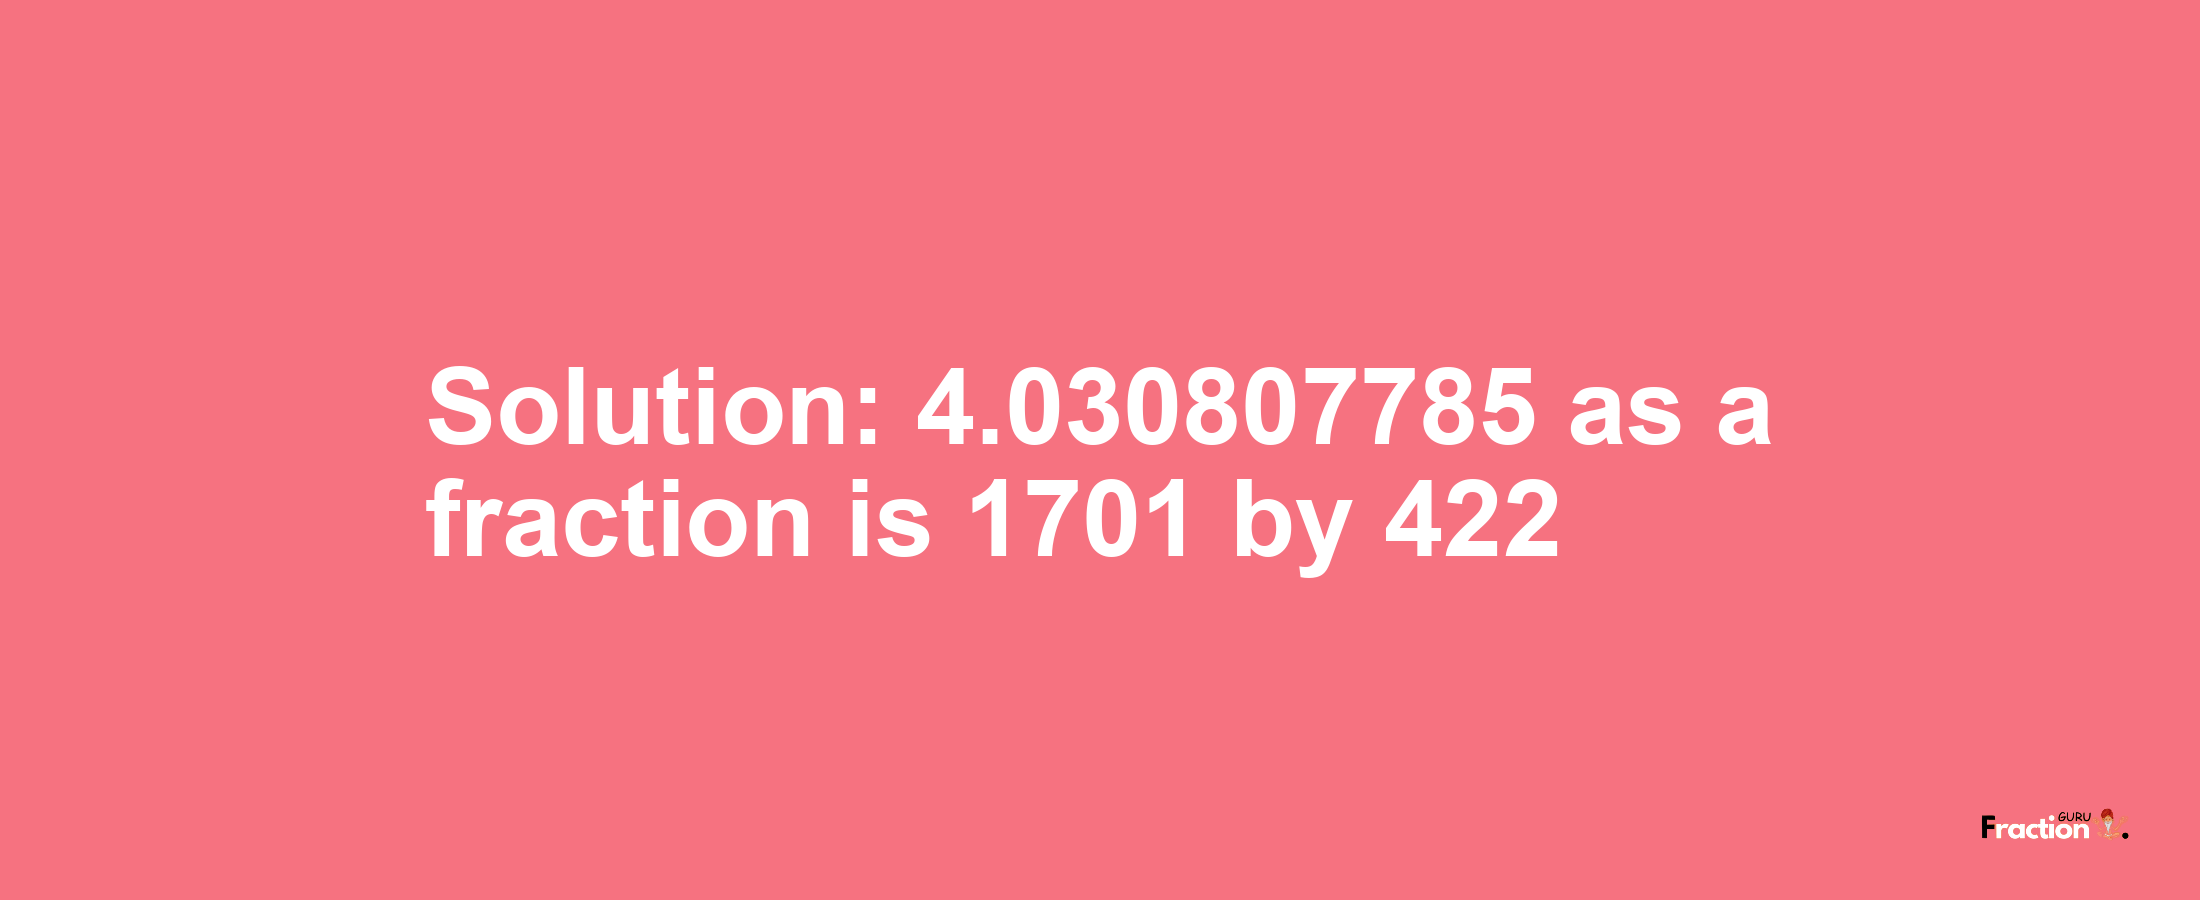 Solution:4.030807785 as a fraction is 1701/422